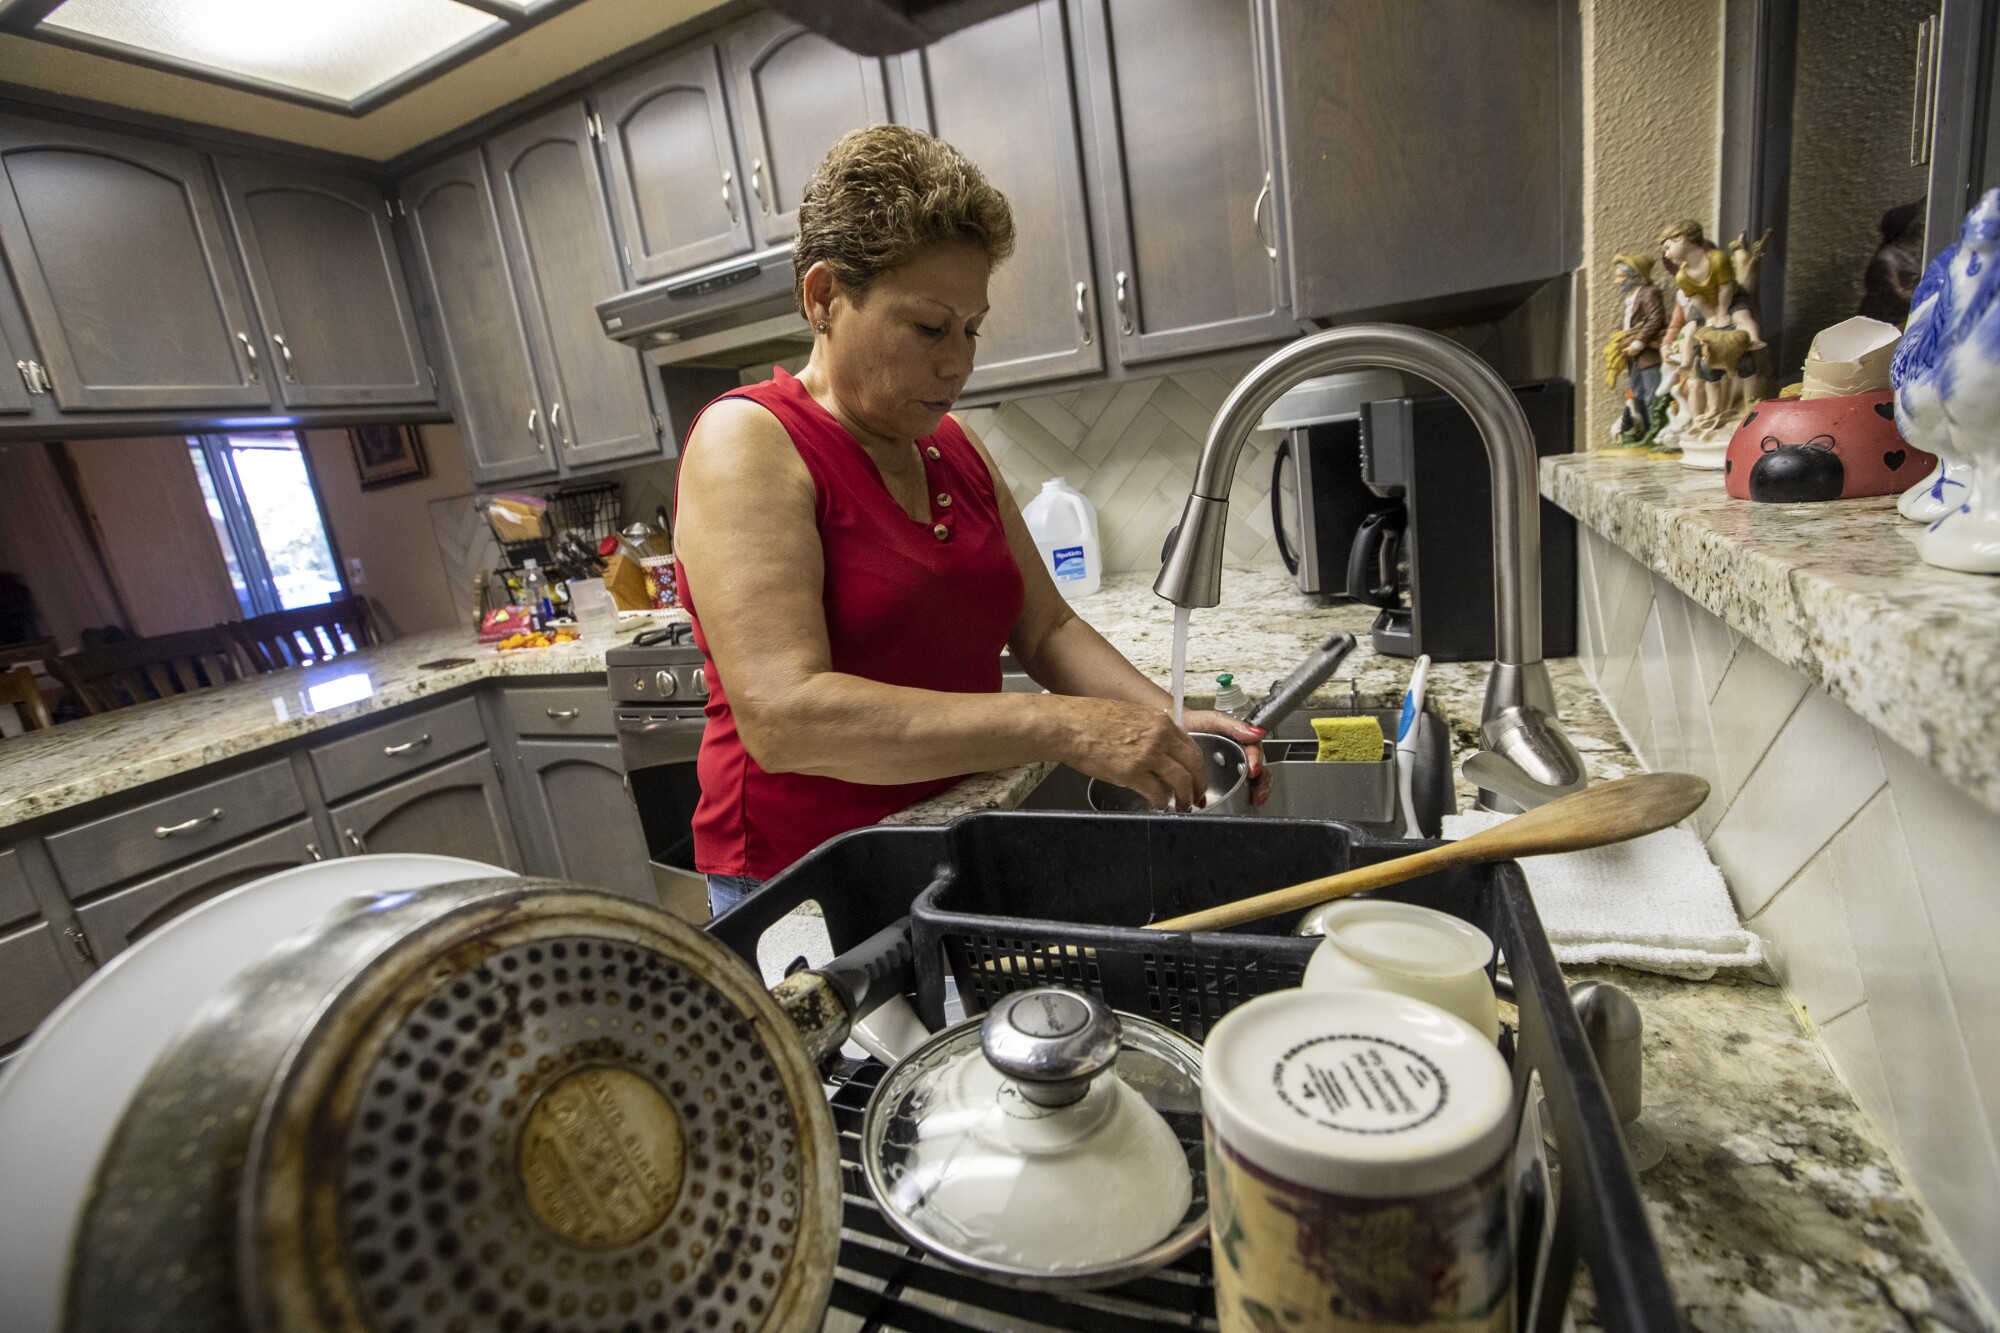 Maria Olivera, who is living with chromium and arsenic in her well, washes dishes at home.